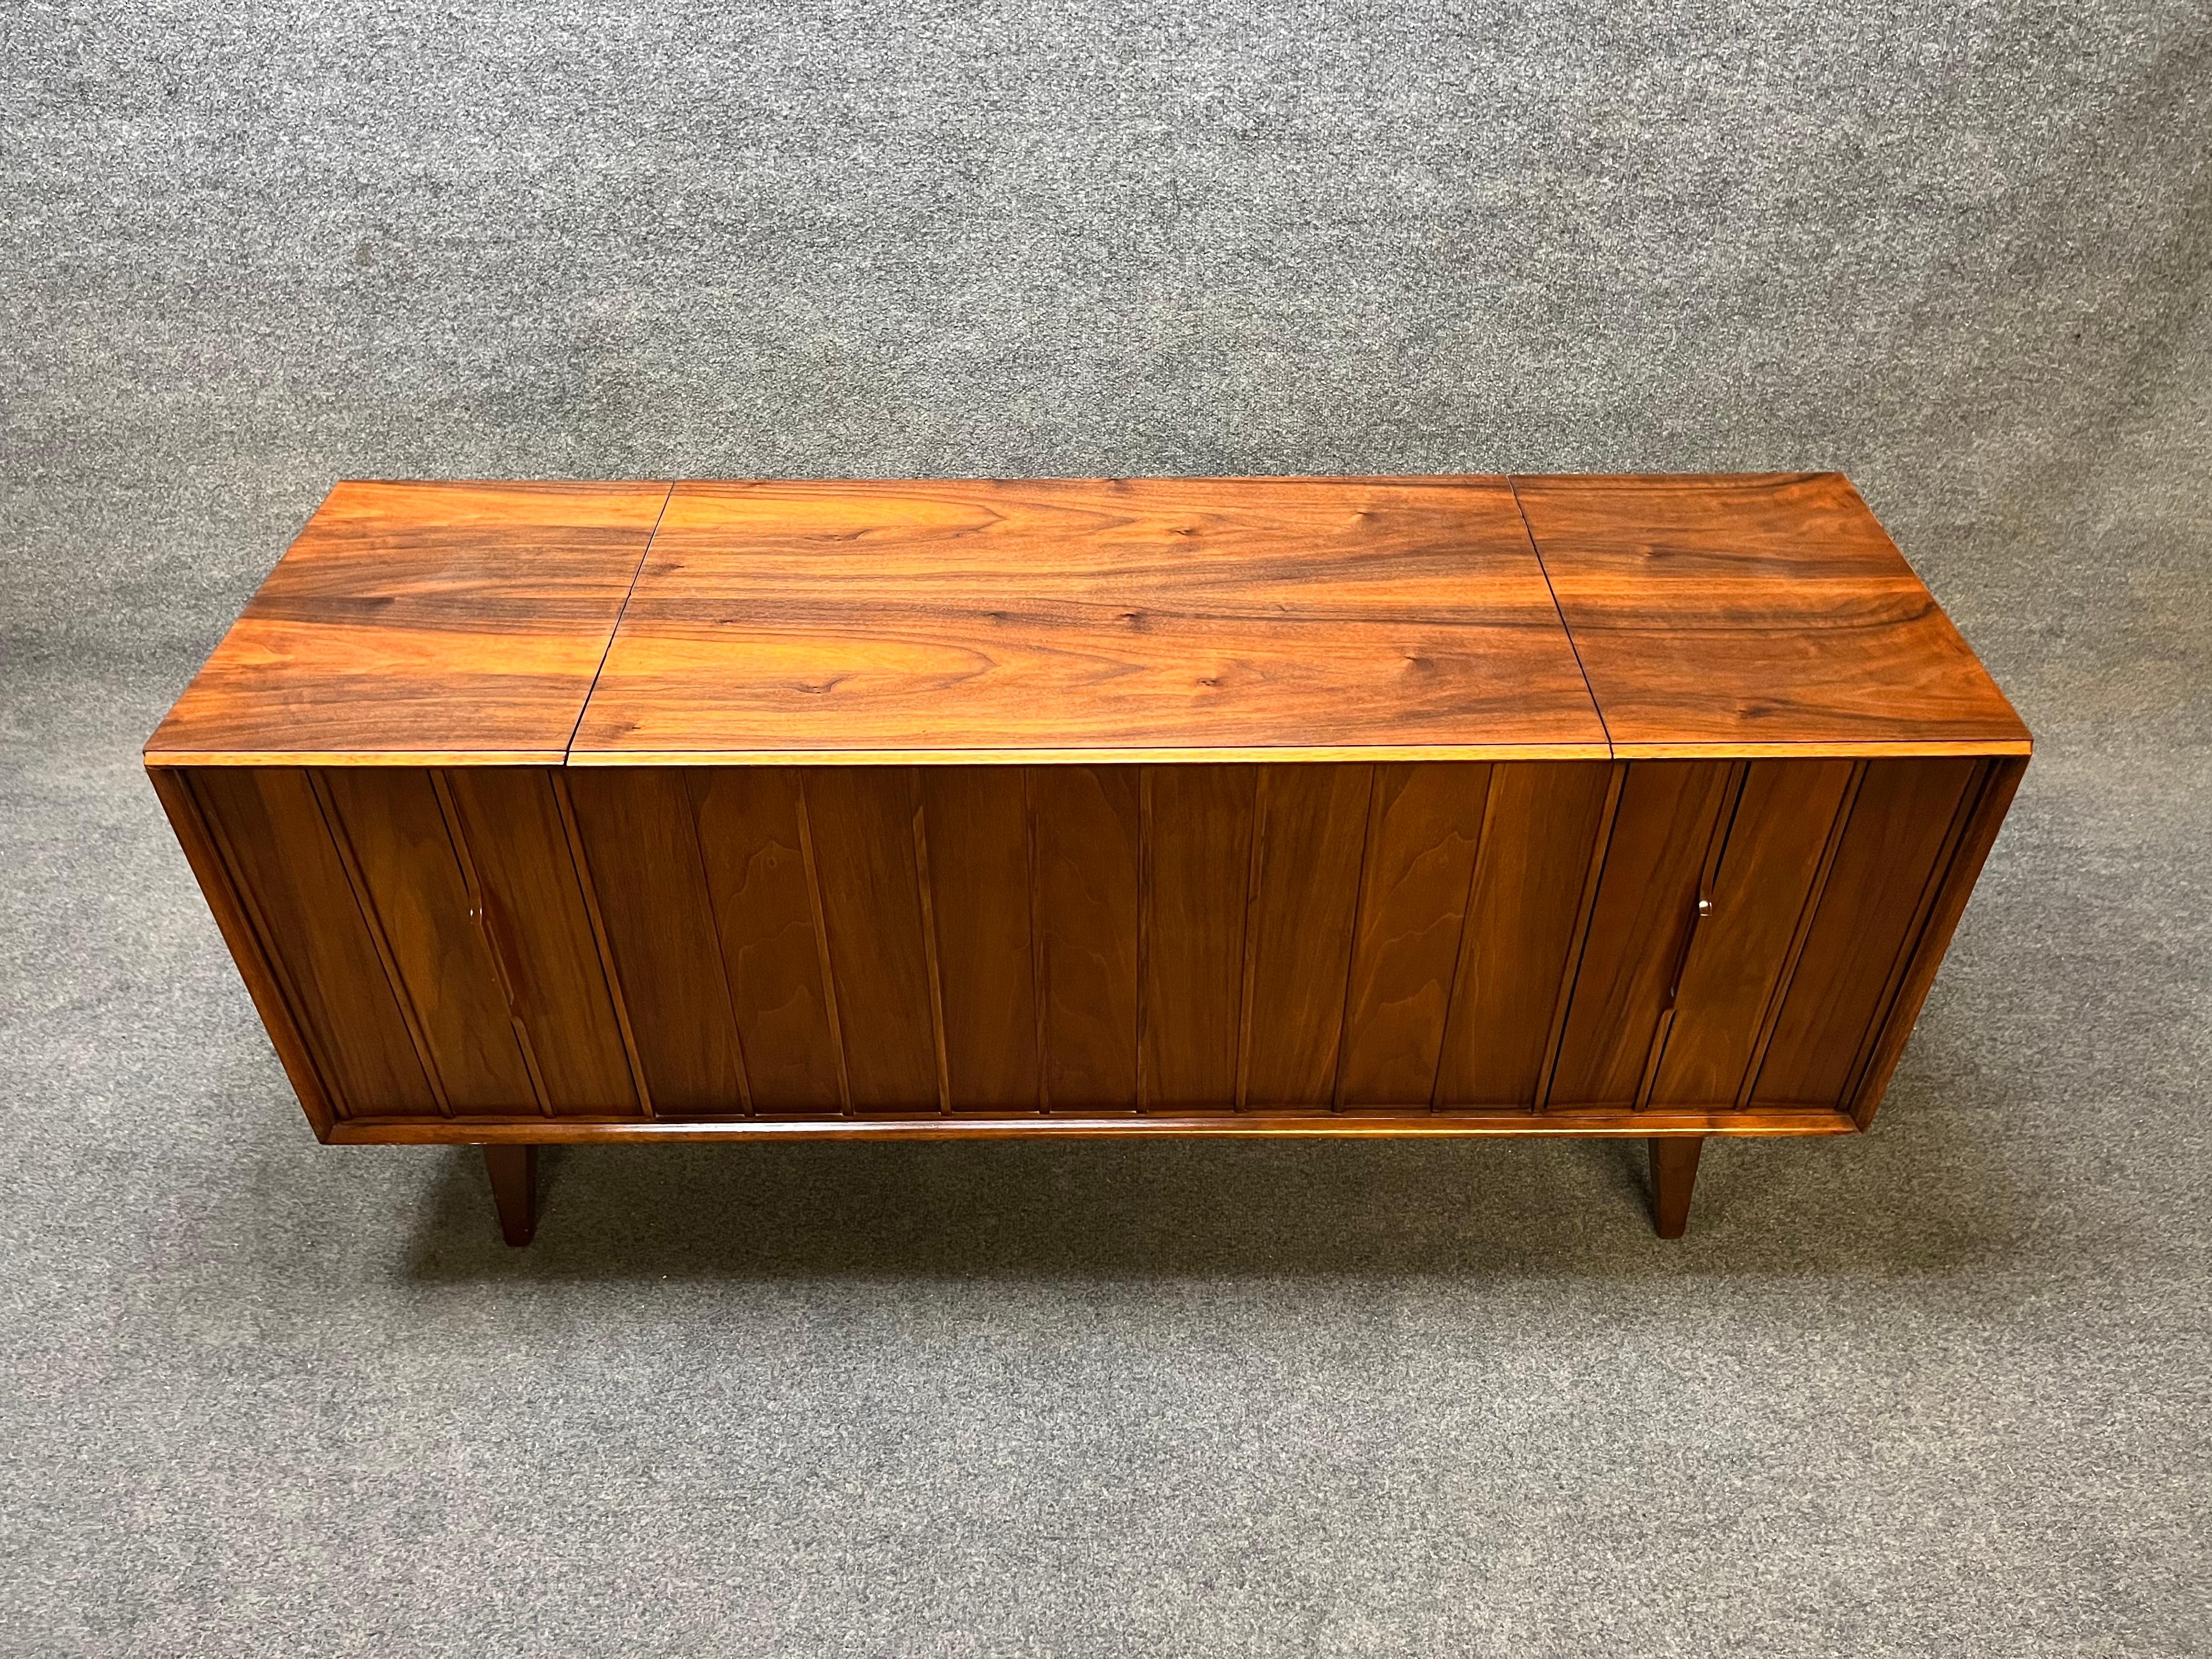 Here is a very sought after Mid century Zenith stereo console. Model X930. The top and sides have been refinished. Made of walnut with a sculptural front. Louvered doors for the speakers. No rips or tears in the speaker cloth. The radio works and